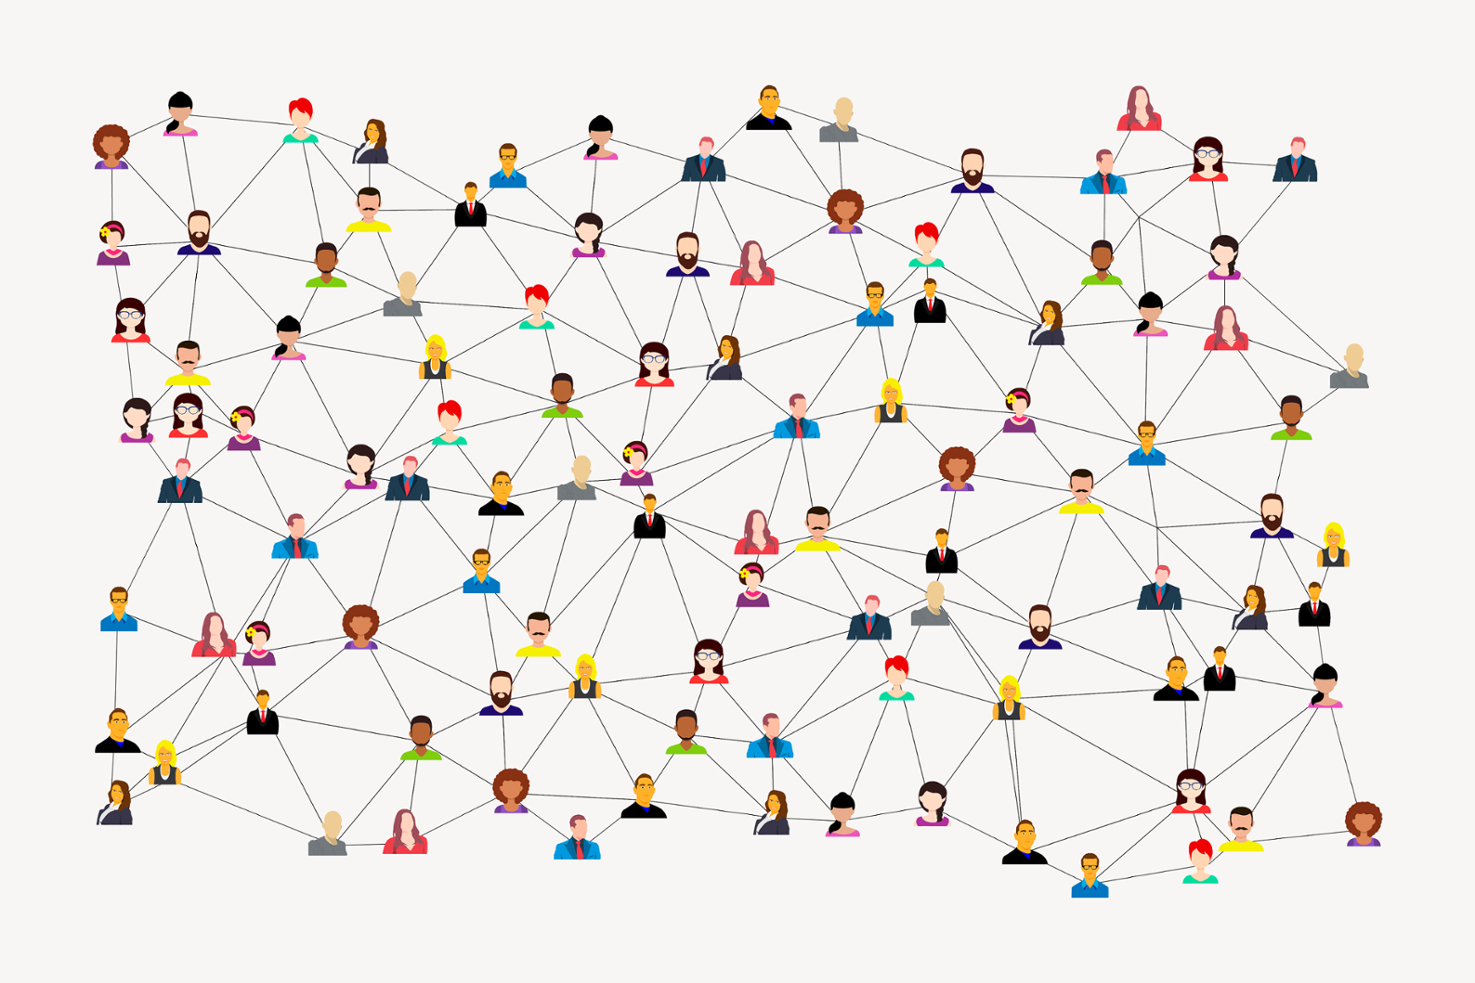 People icons connected by lines to create a network